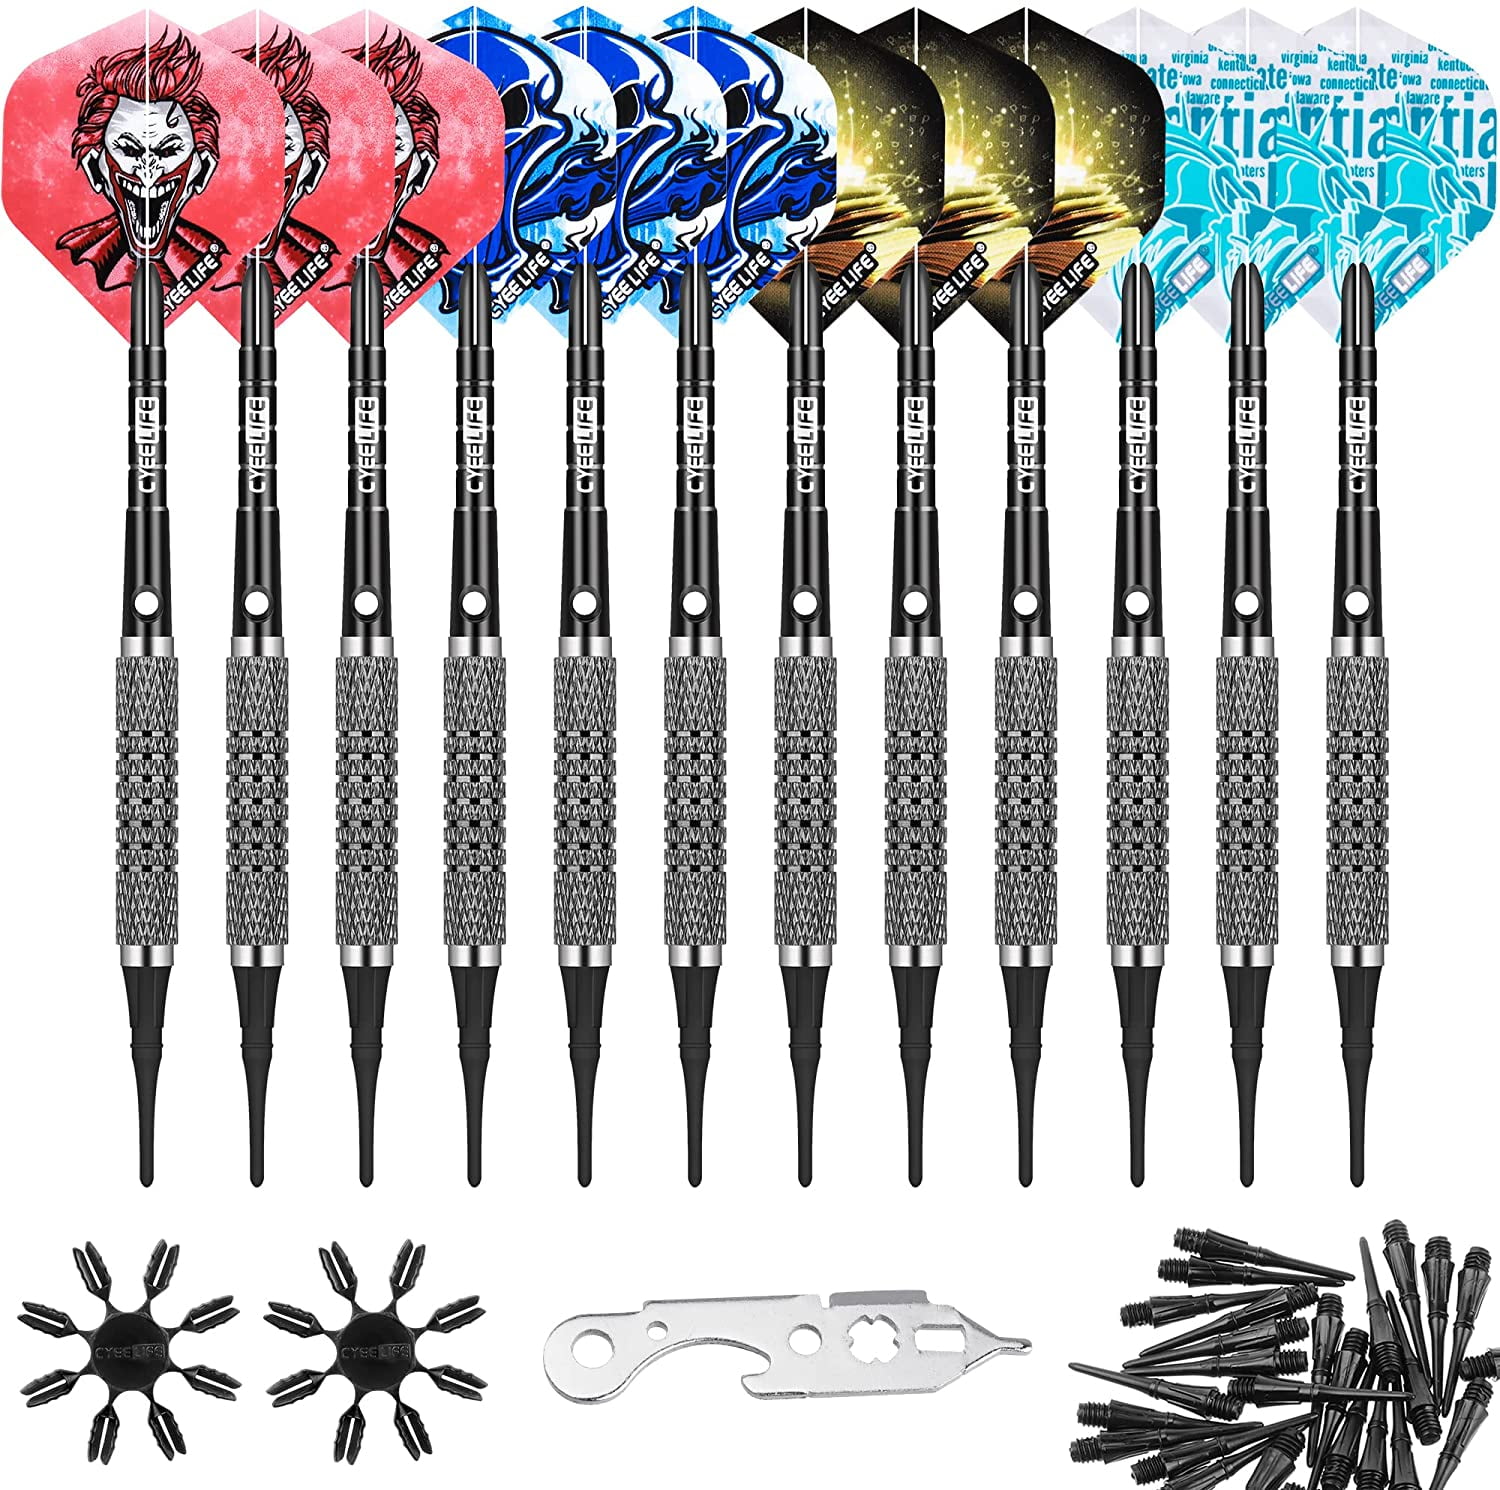 2 Pack Top Spin Aluminum Dart Shafts Medium Choose Your Color w/ FREE Shipping 